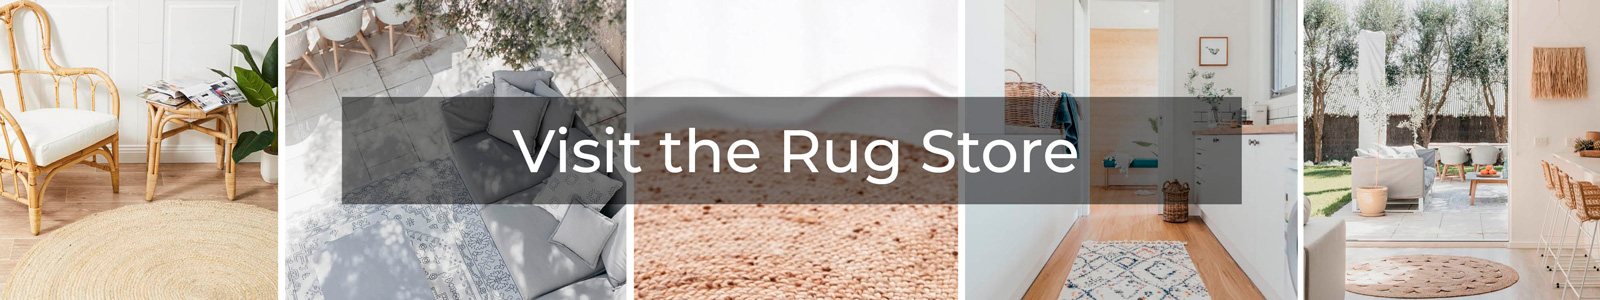 visit flooring xtra rug store. shop all our rugs online